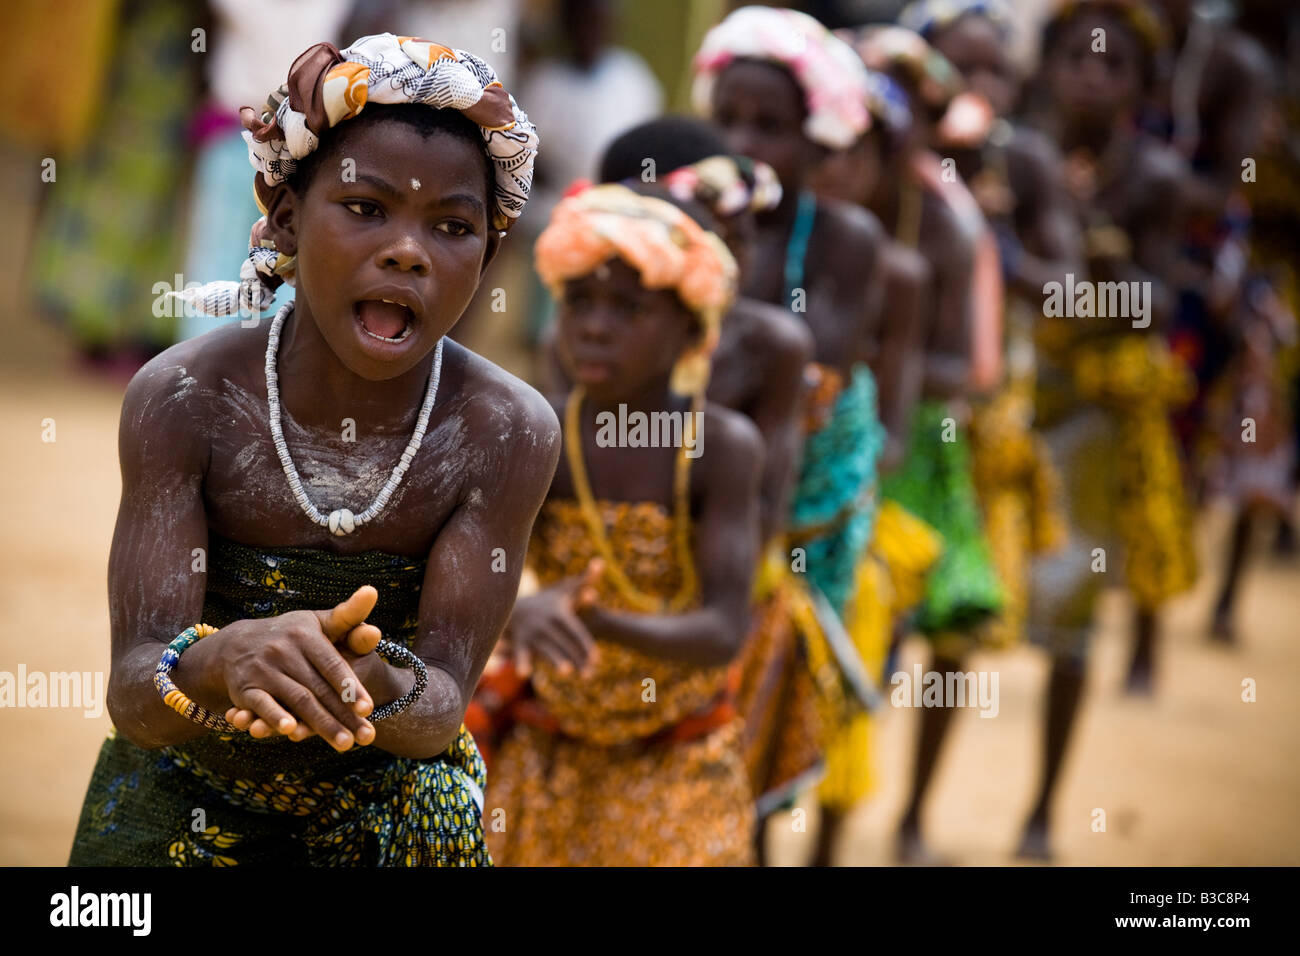 Children performing traditional dance in the town of Afiaso, Ghana Stock Photo